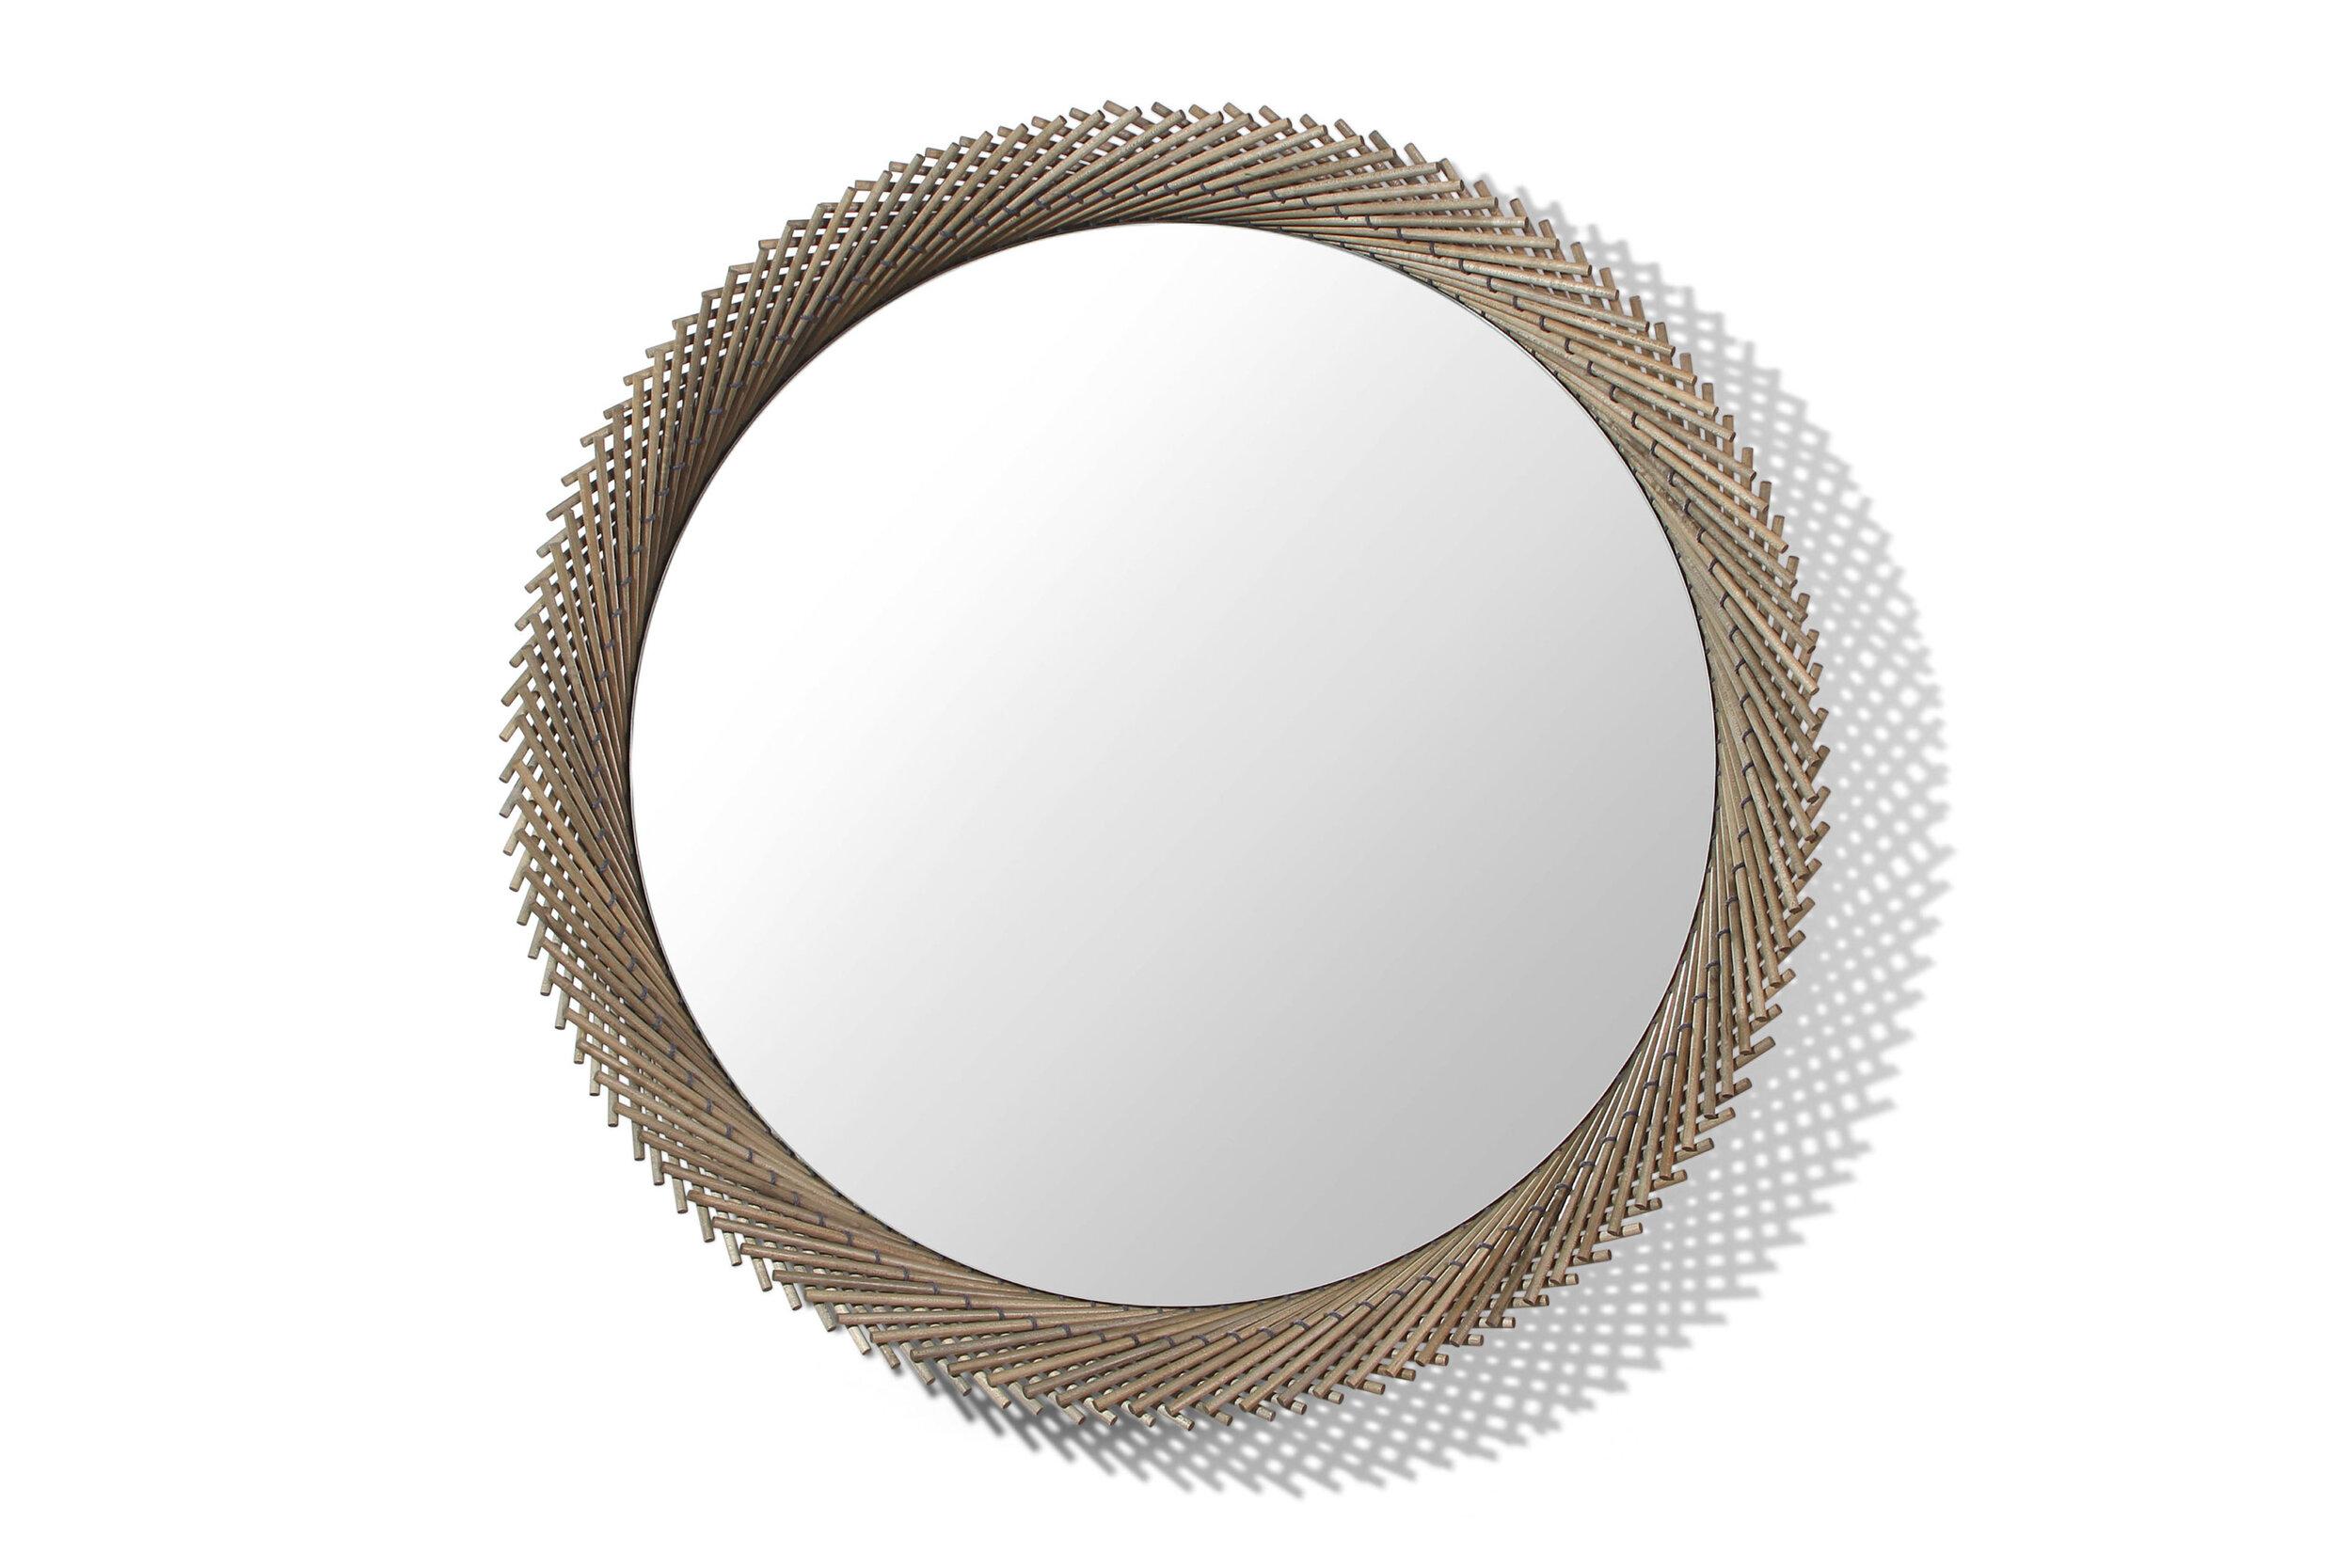 The Mooda Mirror is composed of a set of dowels stitched together to create a beautiful geometric edge around the glass. The mirror in turn reflects the dowels along its circumference, completing the traditional form of the Mooda.   Available in two